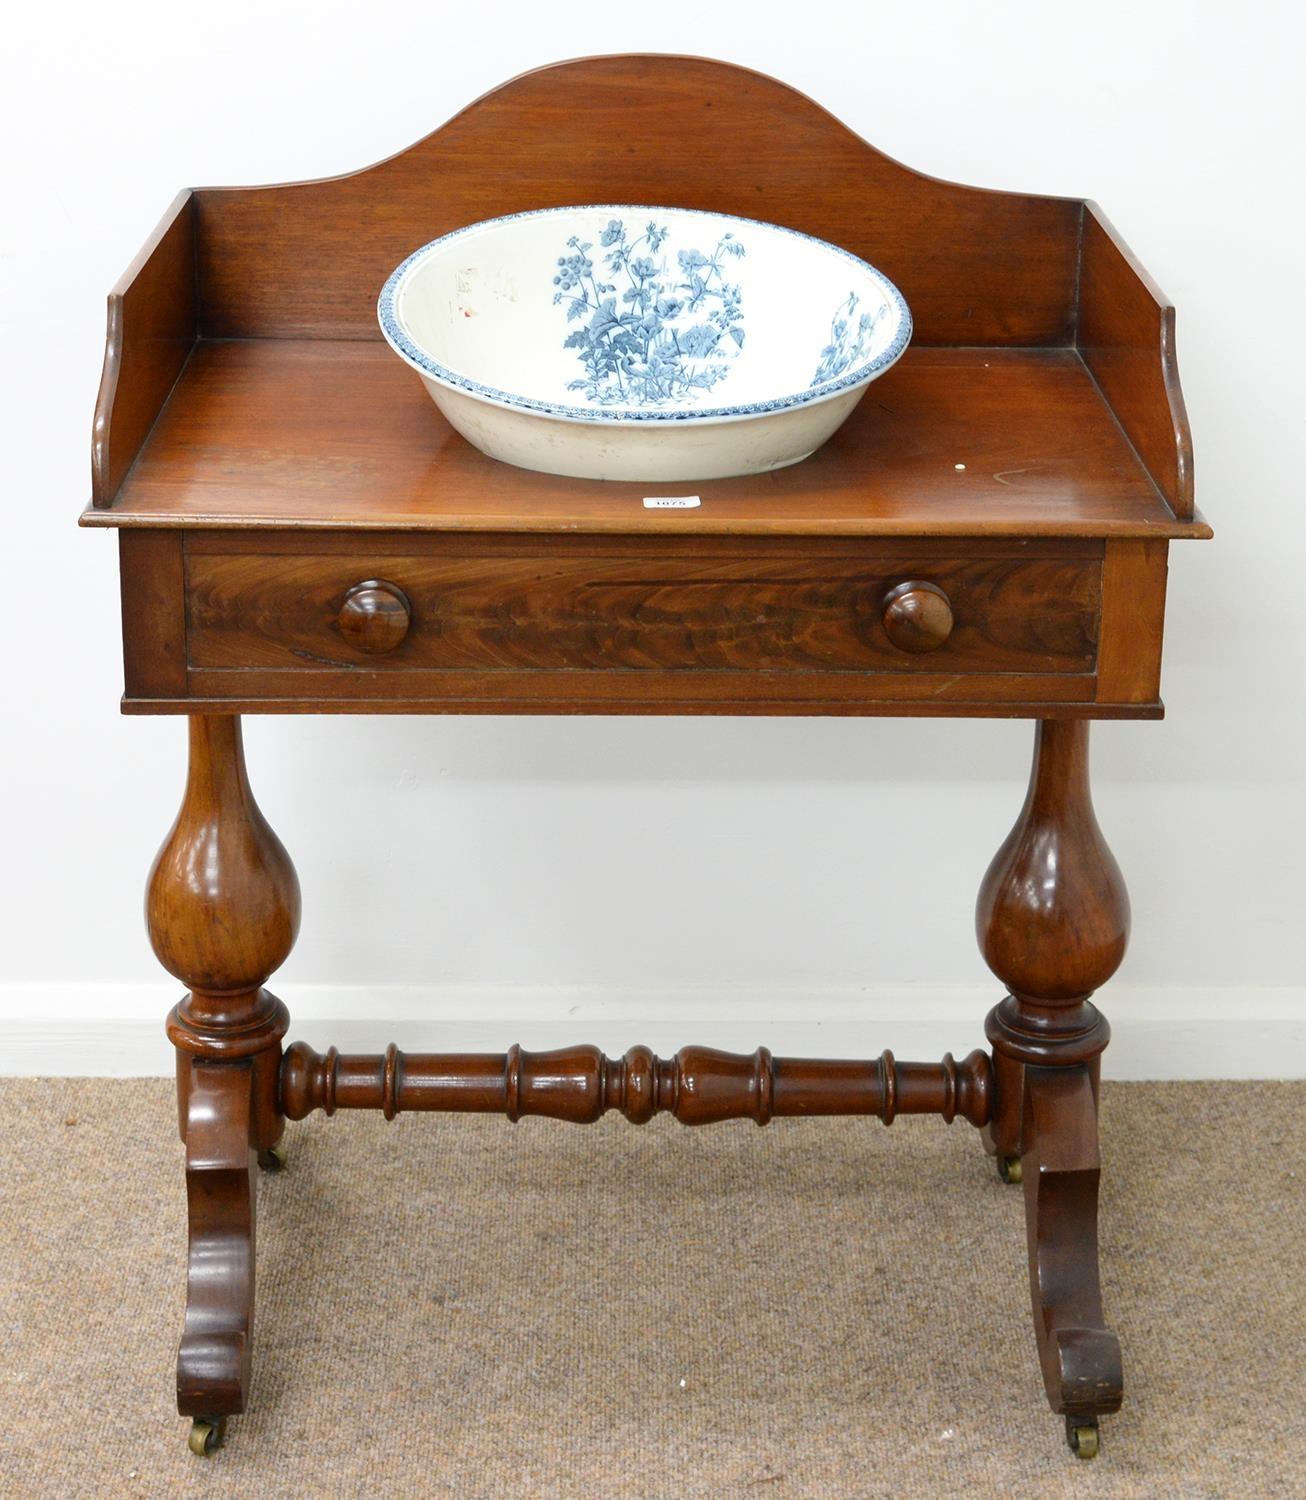 A VICTORIAN MAHOGANY WASH STAND, C1870, THE GALLERIED RECTANGULAR TOP WITH CENTRAL HOLE FOR BASIN